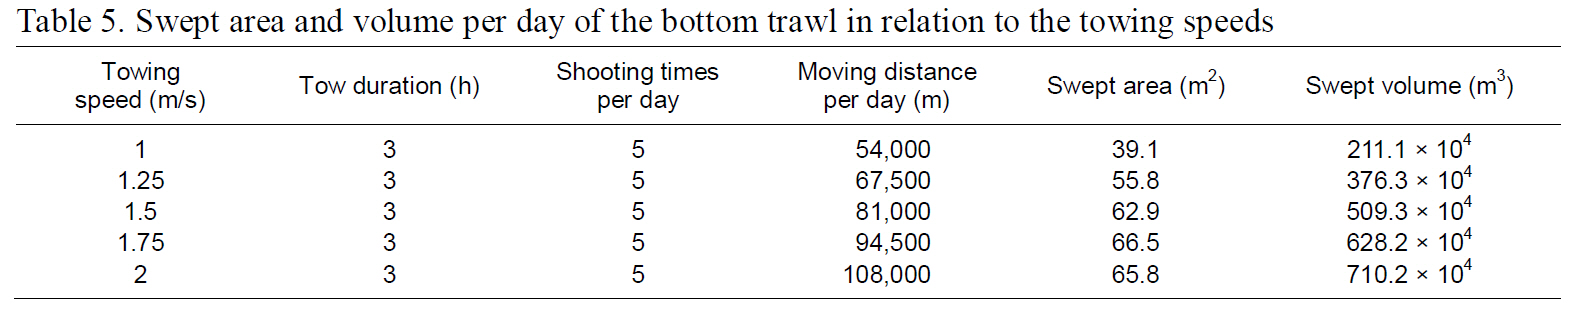 Swept area and volume per day of the bottom trawl in relation to the towing speeds